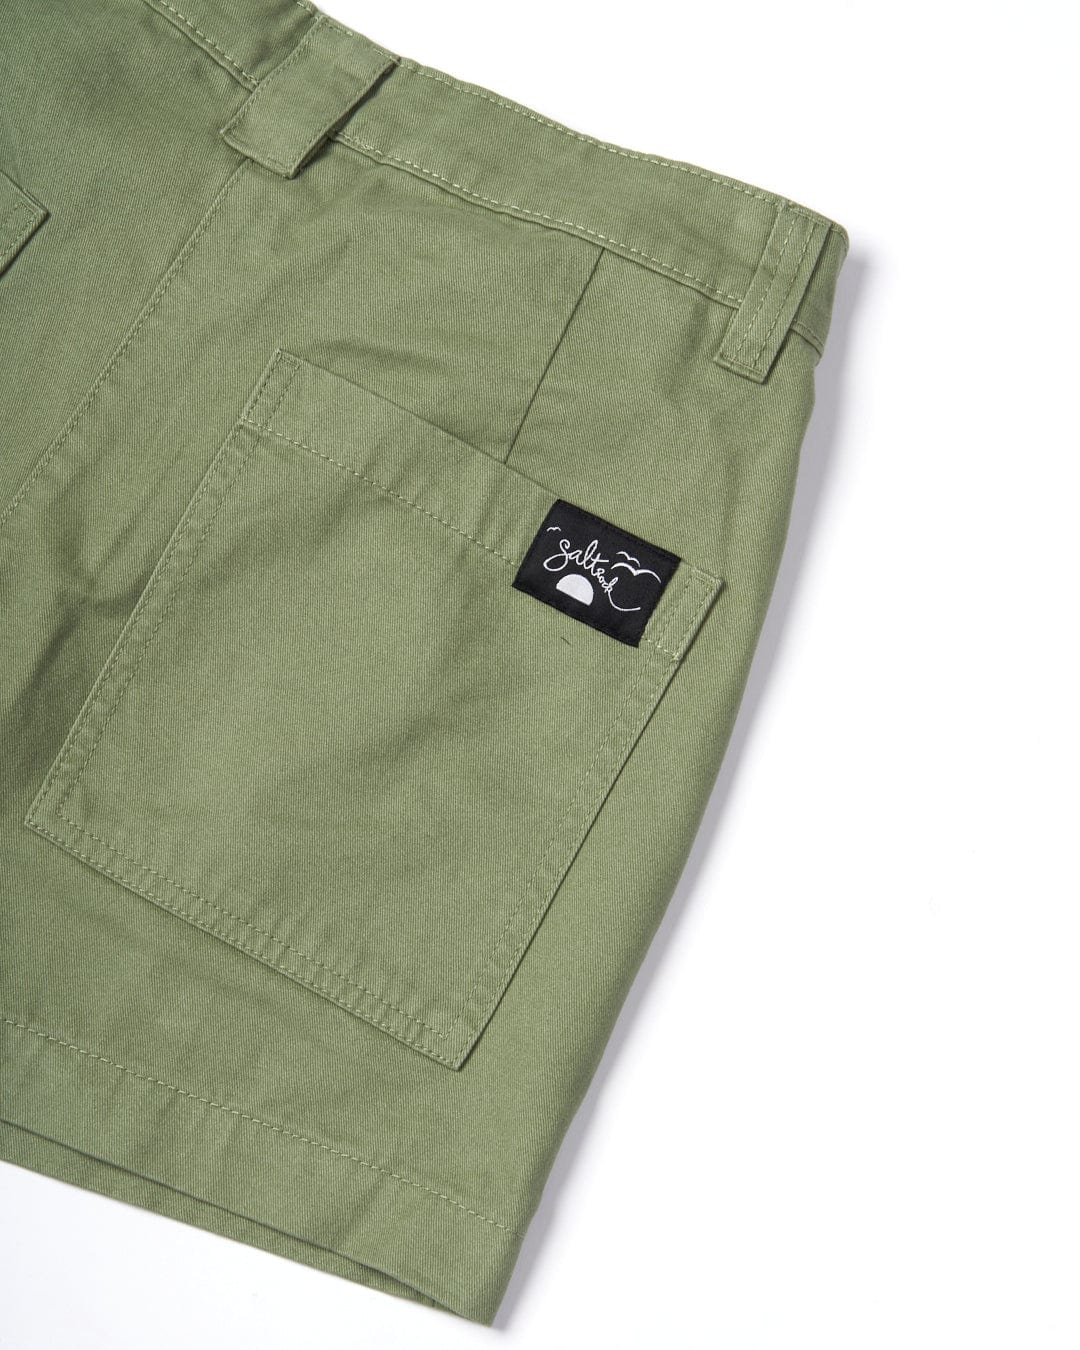 Saltrock Liesl - Womens Chino Short - Green with a logo tag on the back pocket.